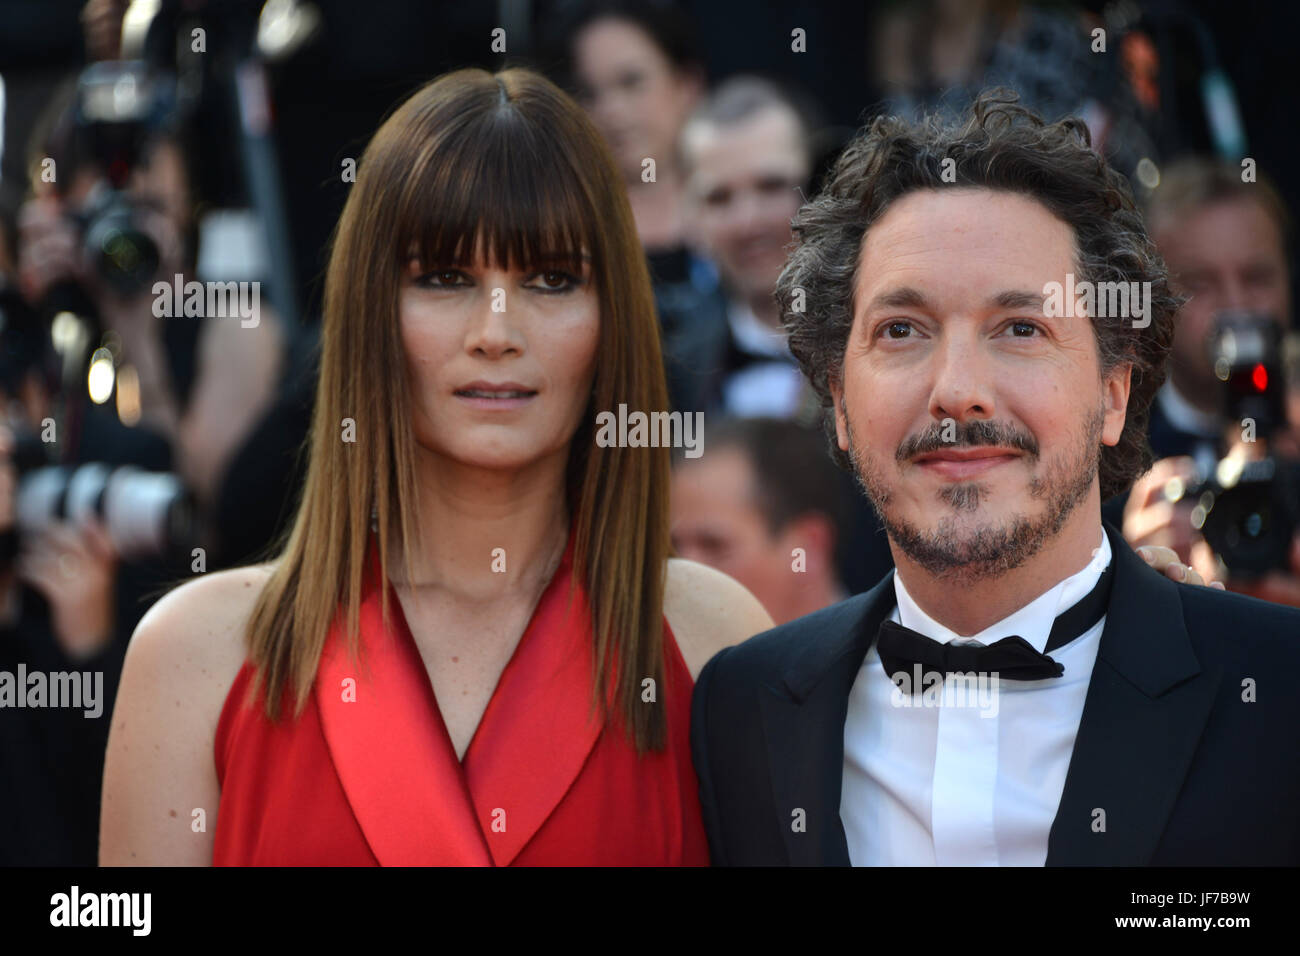 Closing Ceremony of the 70th annual Cannes Film Festival at the Palais des Festivals in Cannes, France.  Featuring: Marina Hands, Guillaume Gallienne Where: Cannes, France When: 28 May 2017 Credit: IPA/WENN.com  **Only available for publication in UK, USA, Germany, Austria, Switzerland** Stock Photo